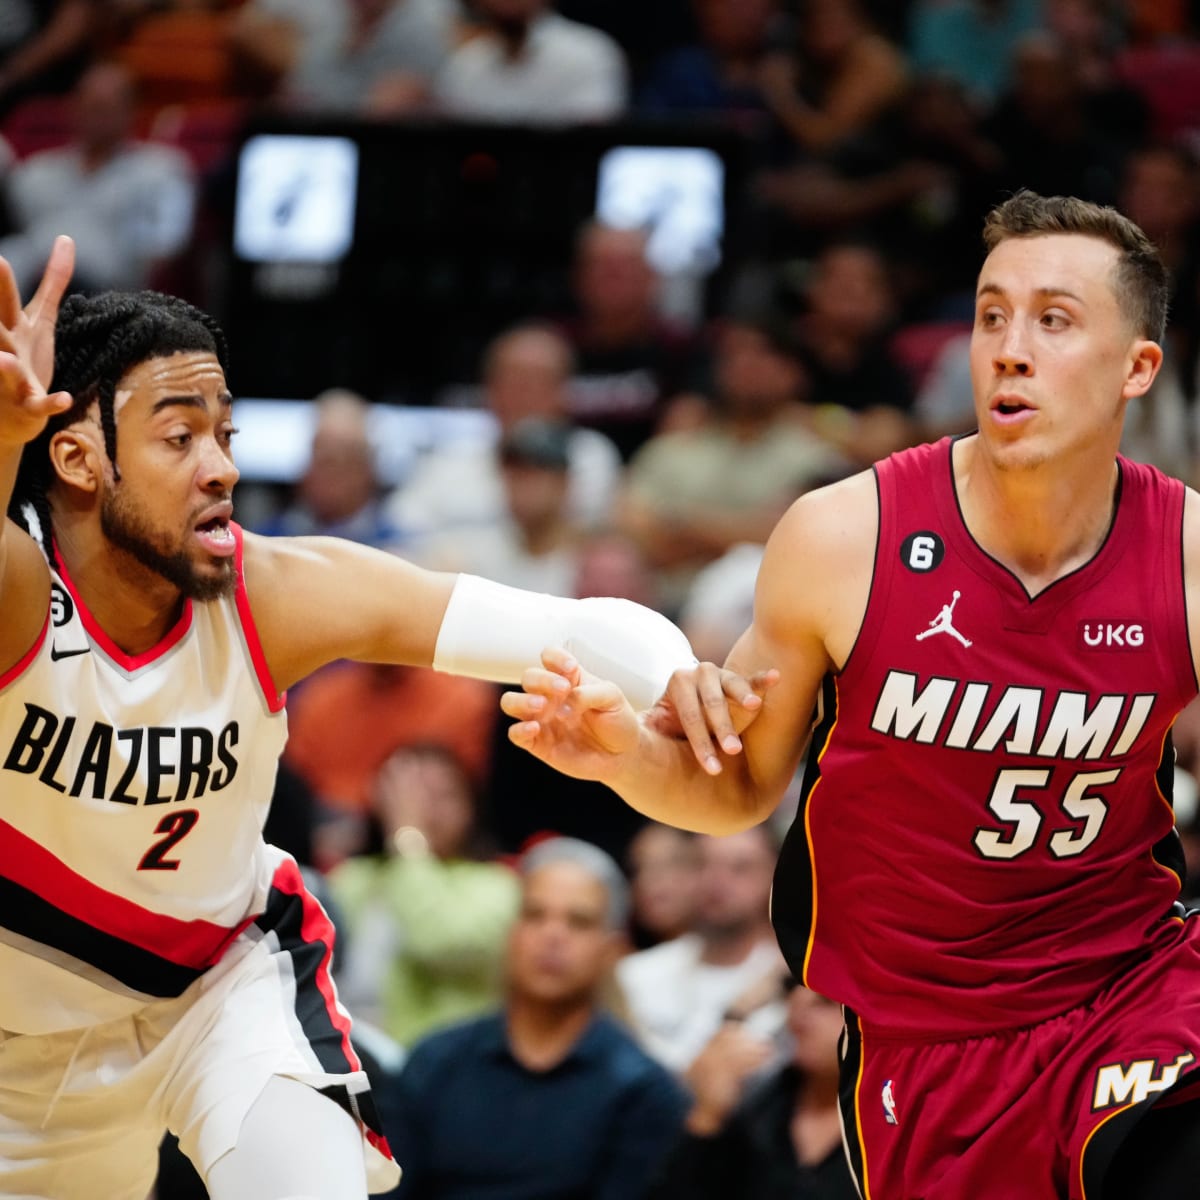 Trail Blazers Fumble Away Final Summer League Game to the Heat